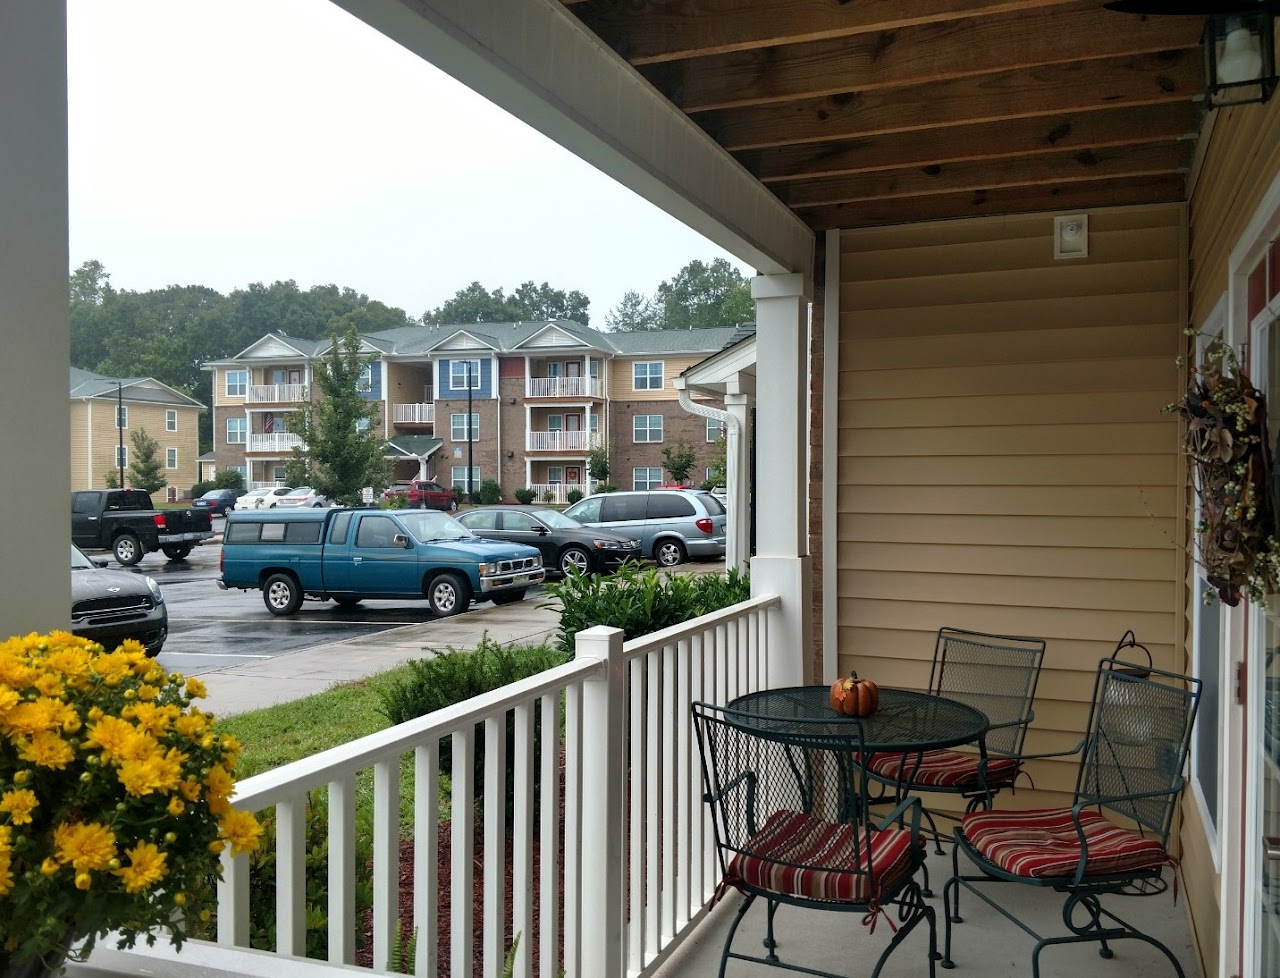 Photo of INDIGO. Affordable housing located at 68 FIREFLY LN FRANKLIN, NC 28734